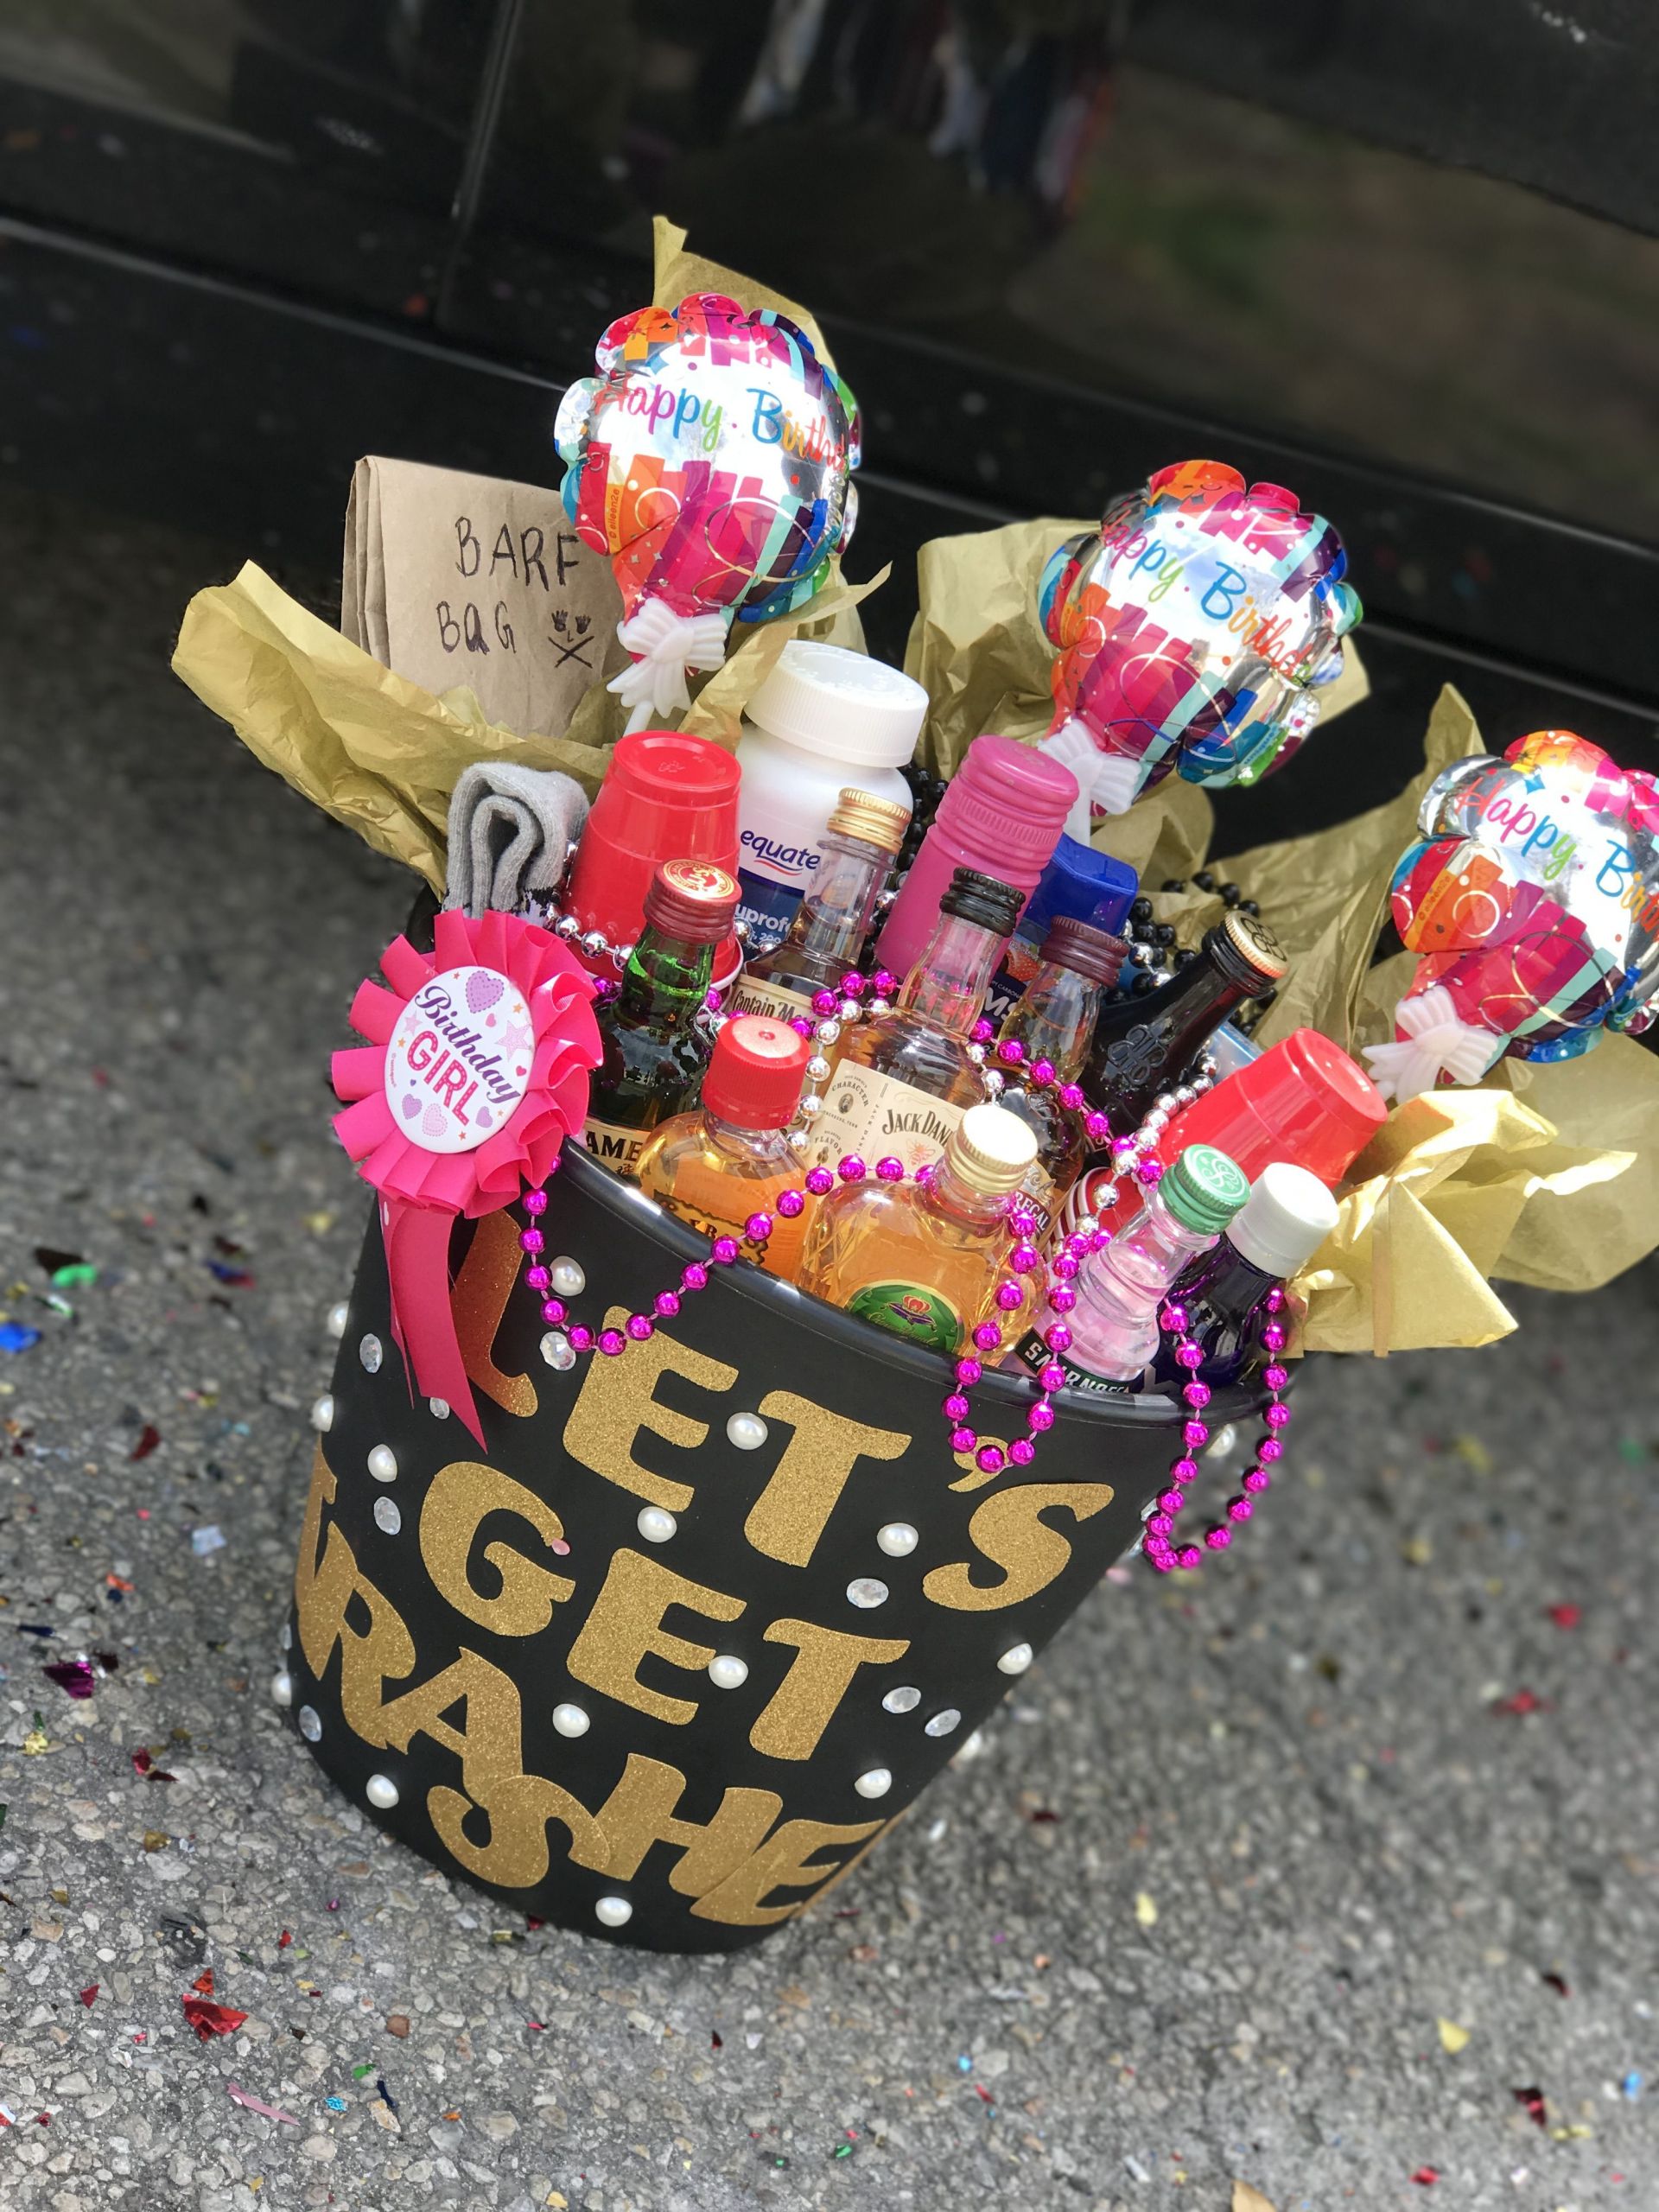 Creative 21St Birthday Gift Ideas For Her
 21st birthday t idea My friends and I are trying to